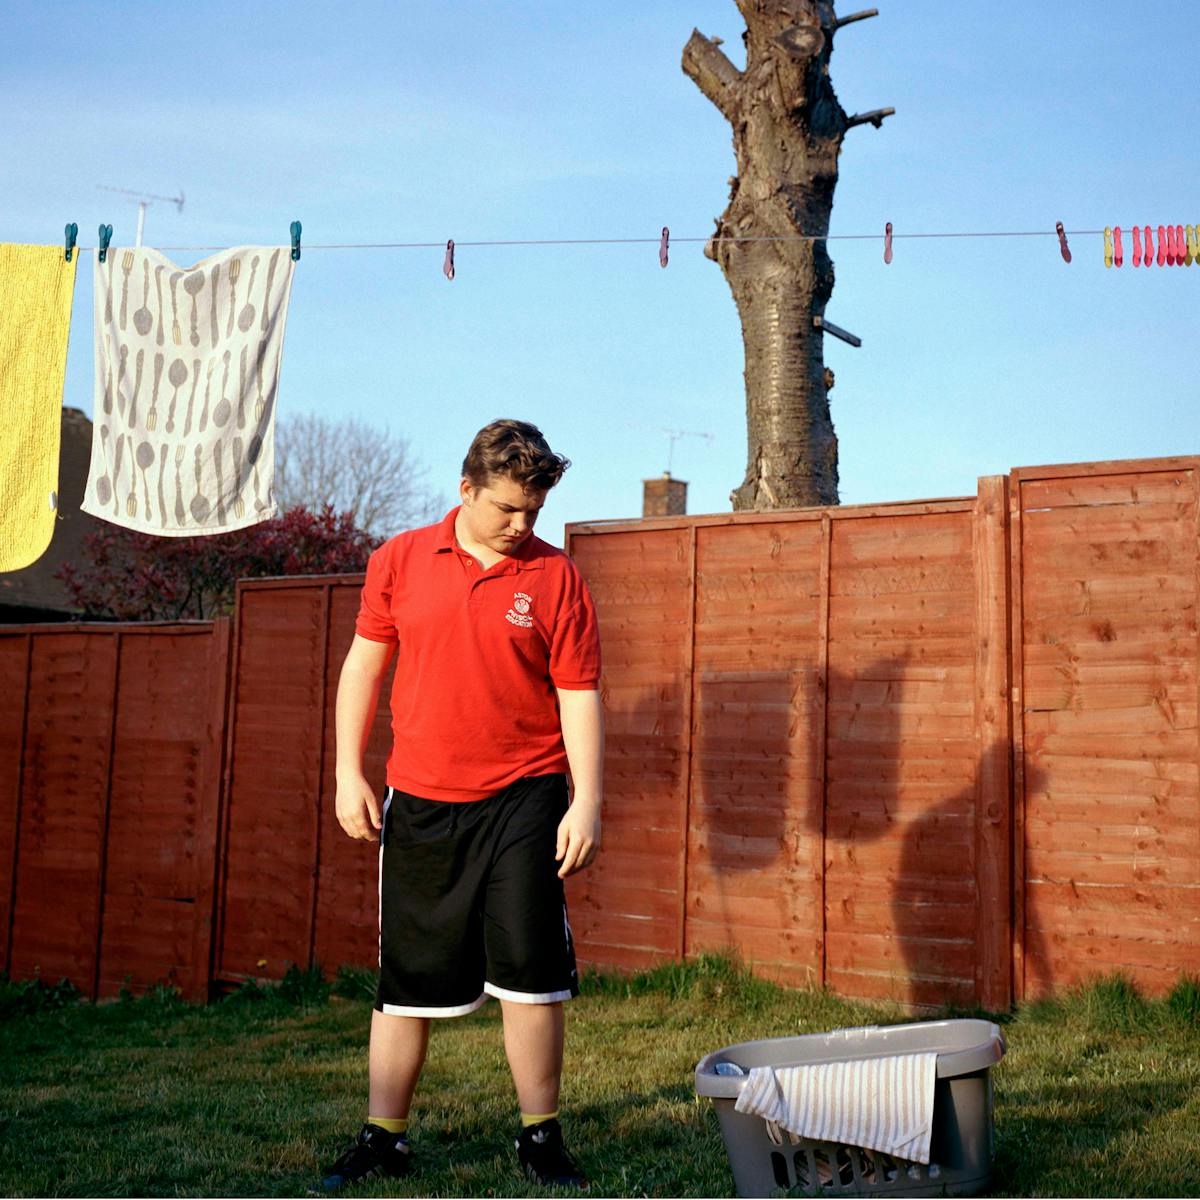 Photograph of a teenage boy wearing a red t-shirt and black shorts, standing in a garden. Above him is a washing line with pegs and towels.